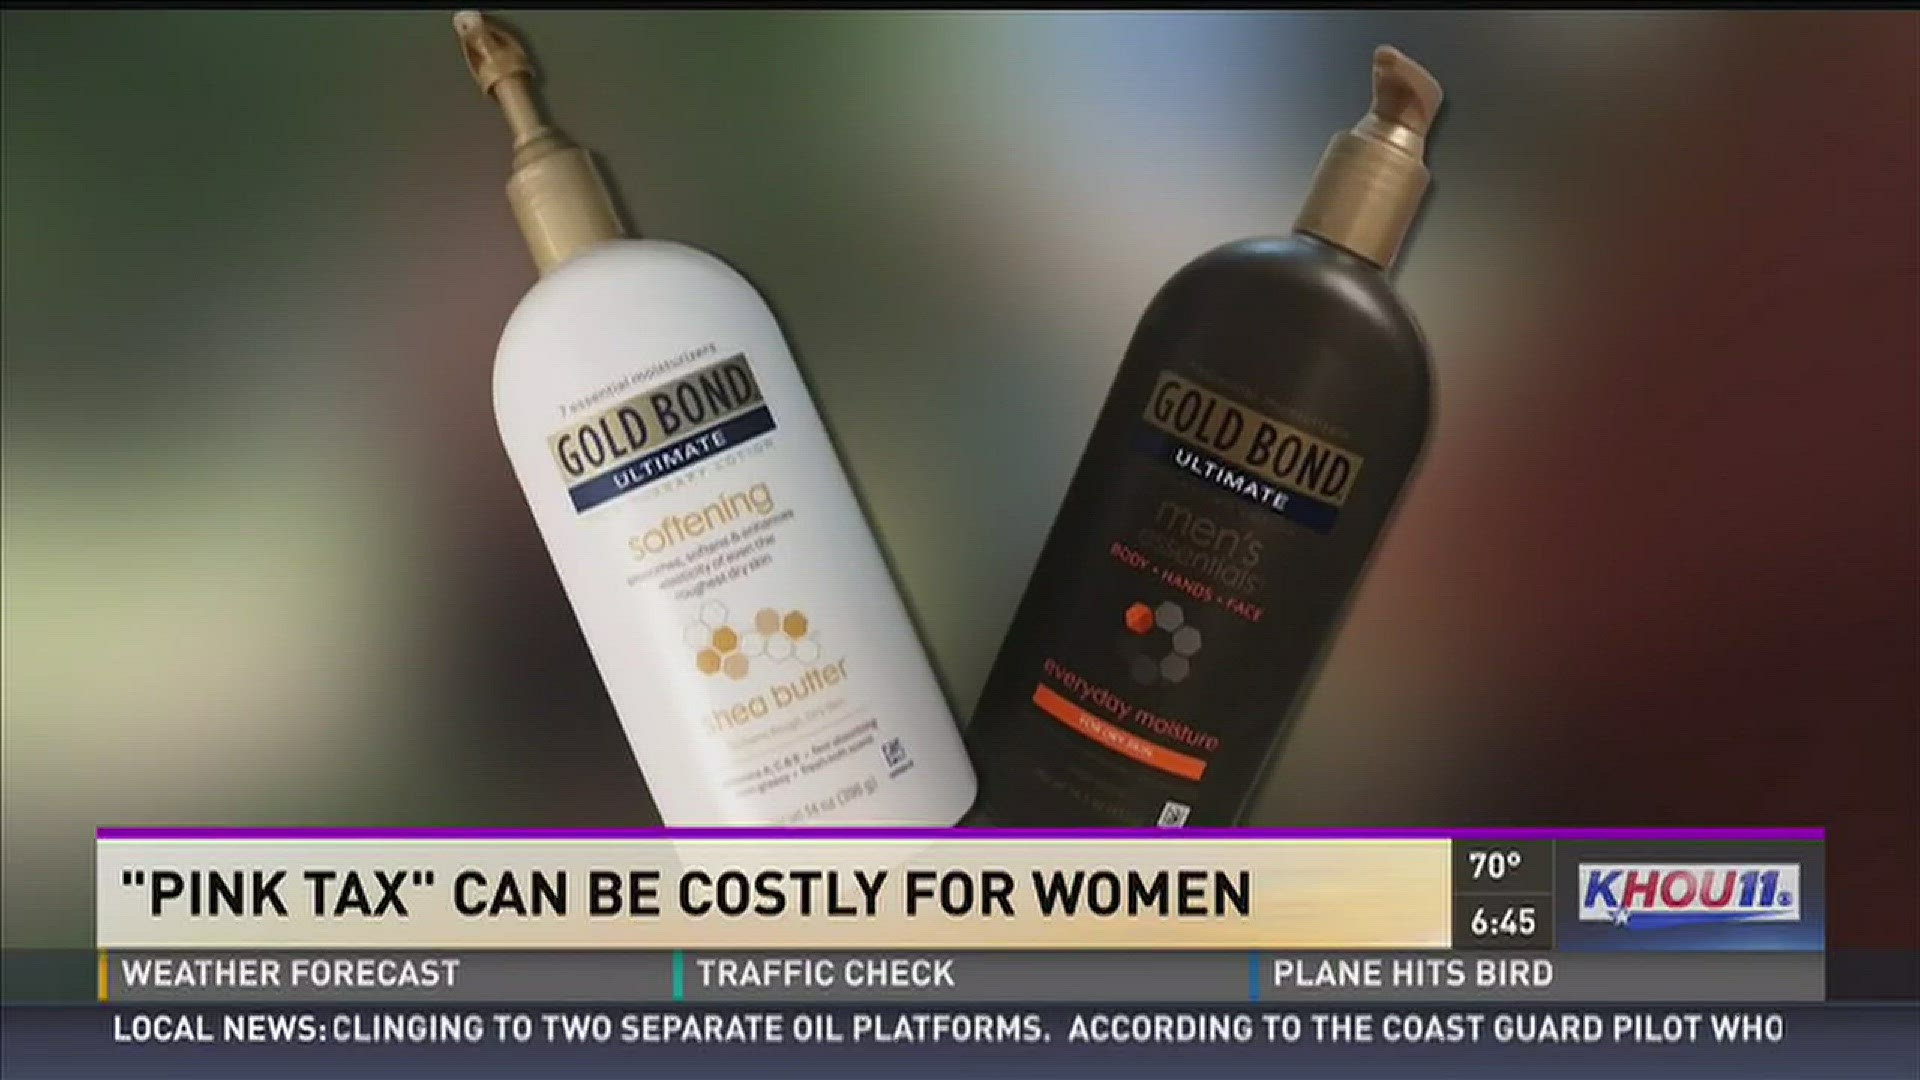 Price comparison among men and women's products and services revealed that women often pay more than men, a trend that people are calling the pink tax